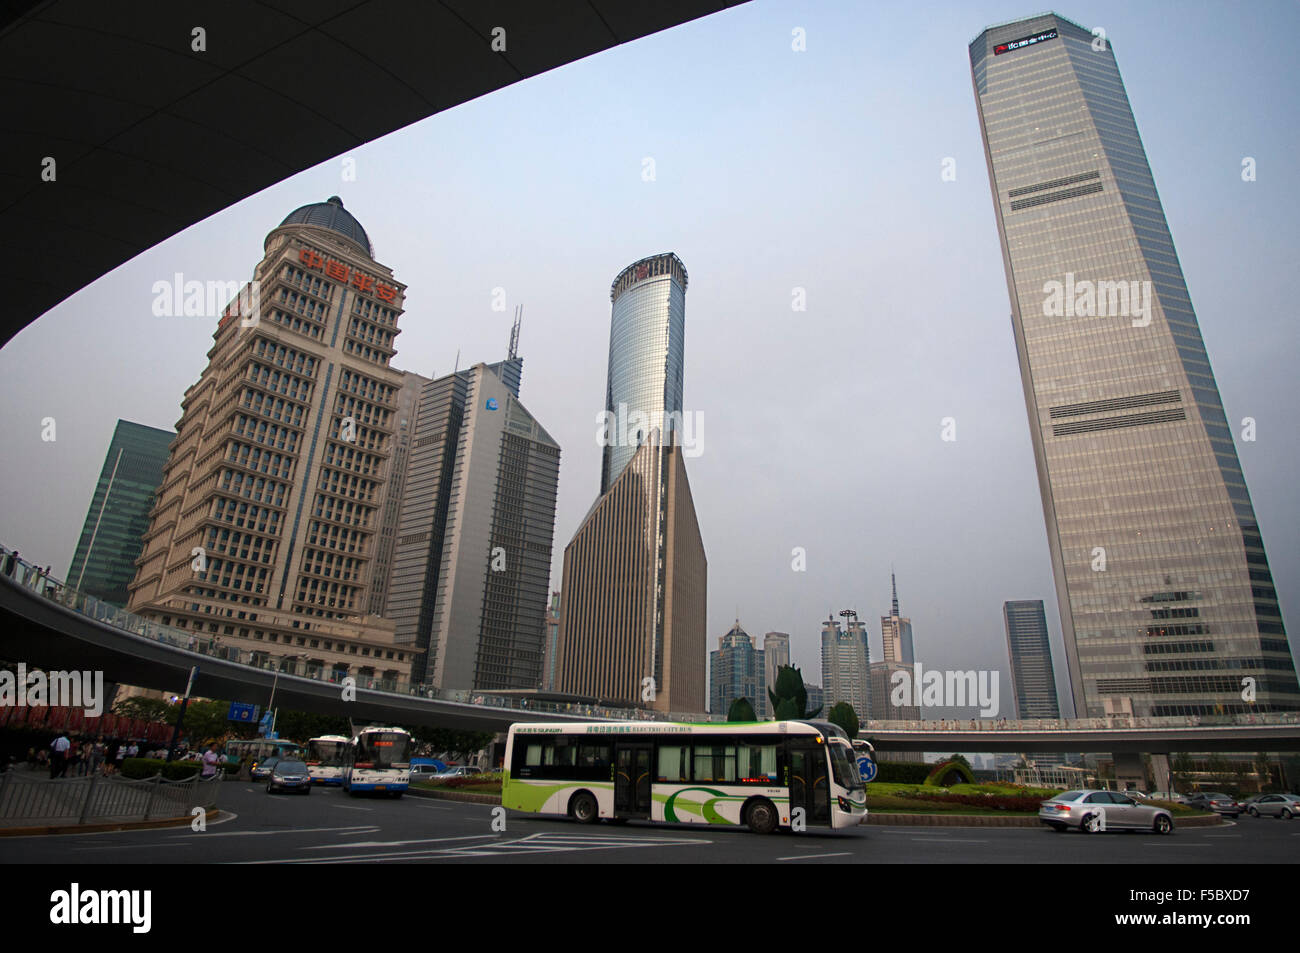 Skyscrapers in Lujiazui financial district, in Pudong, in Shanghai, China. Shanghai International Finance Centre, usually abbrev Stock Photo